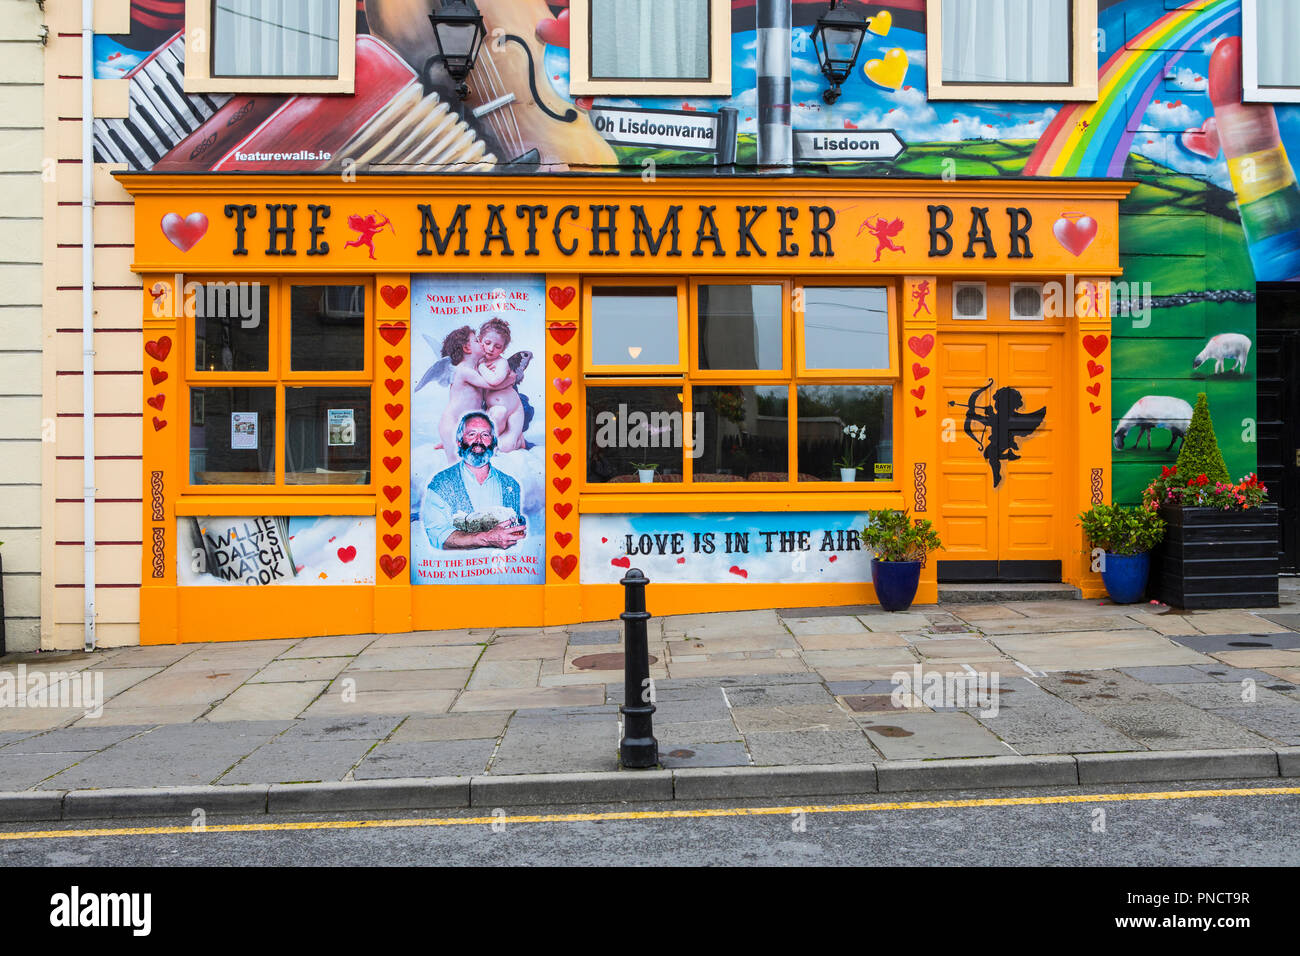 Dating Agency Galway|Matchmaking & Introduction Agency 